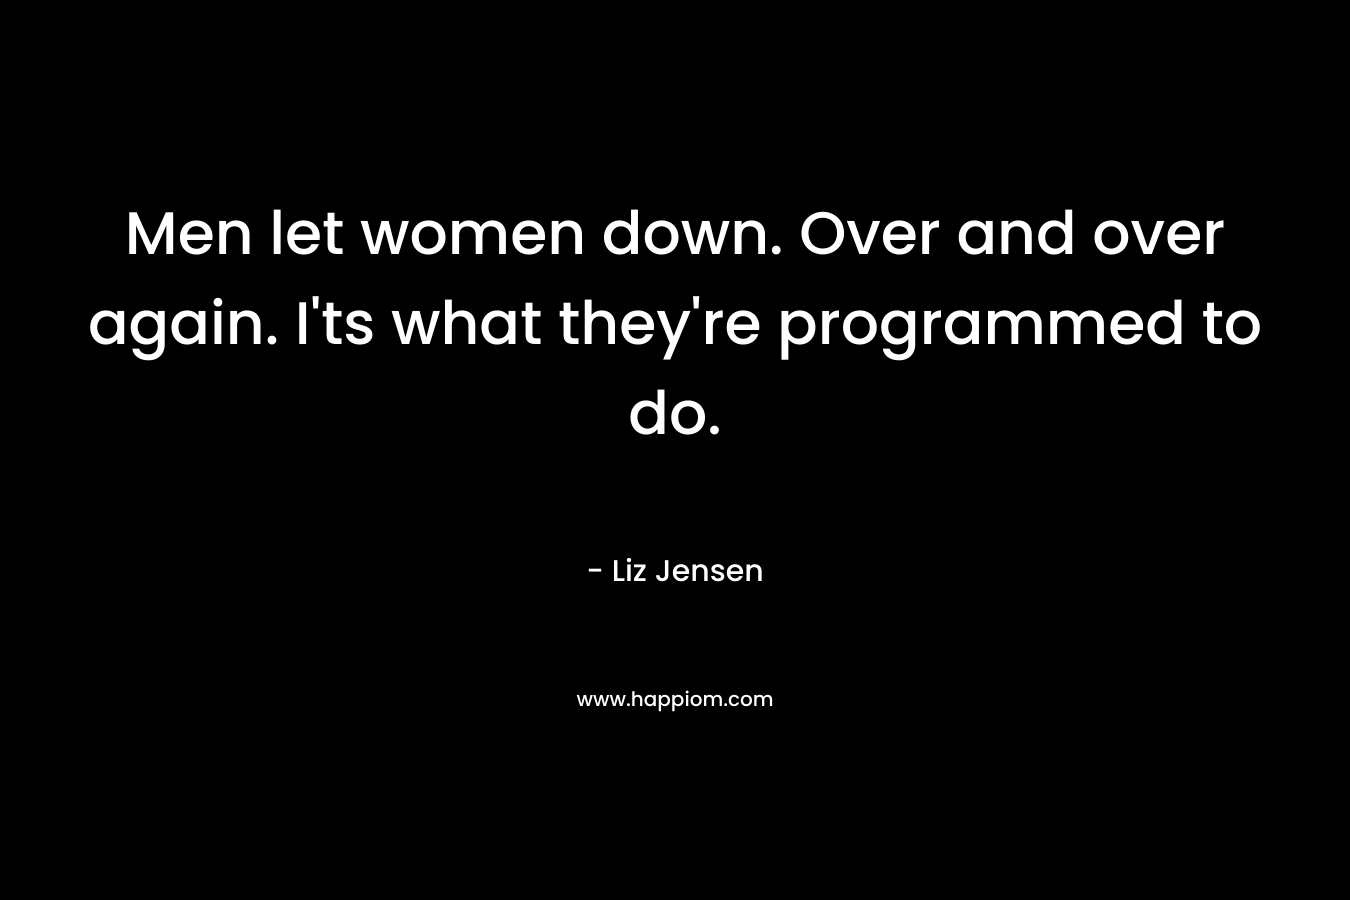 Men let women down. Over and over again. I'ts what they're programmed to do.